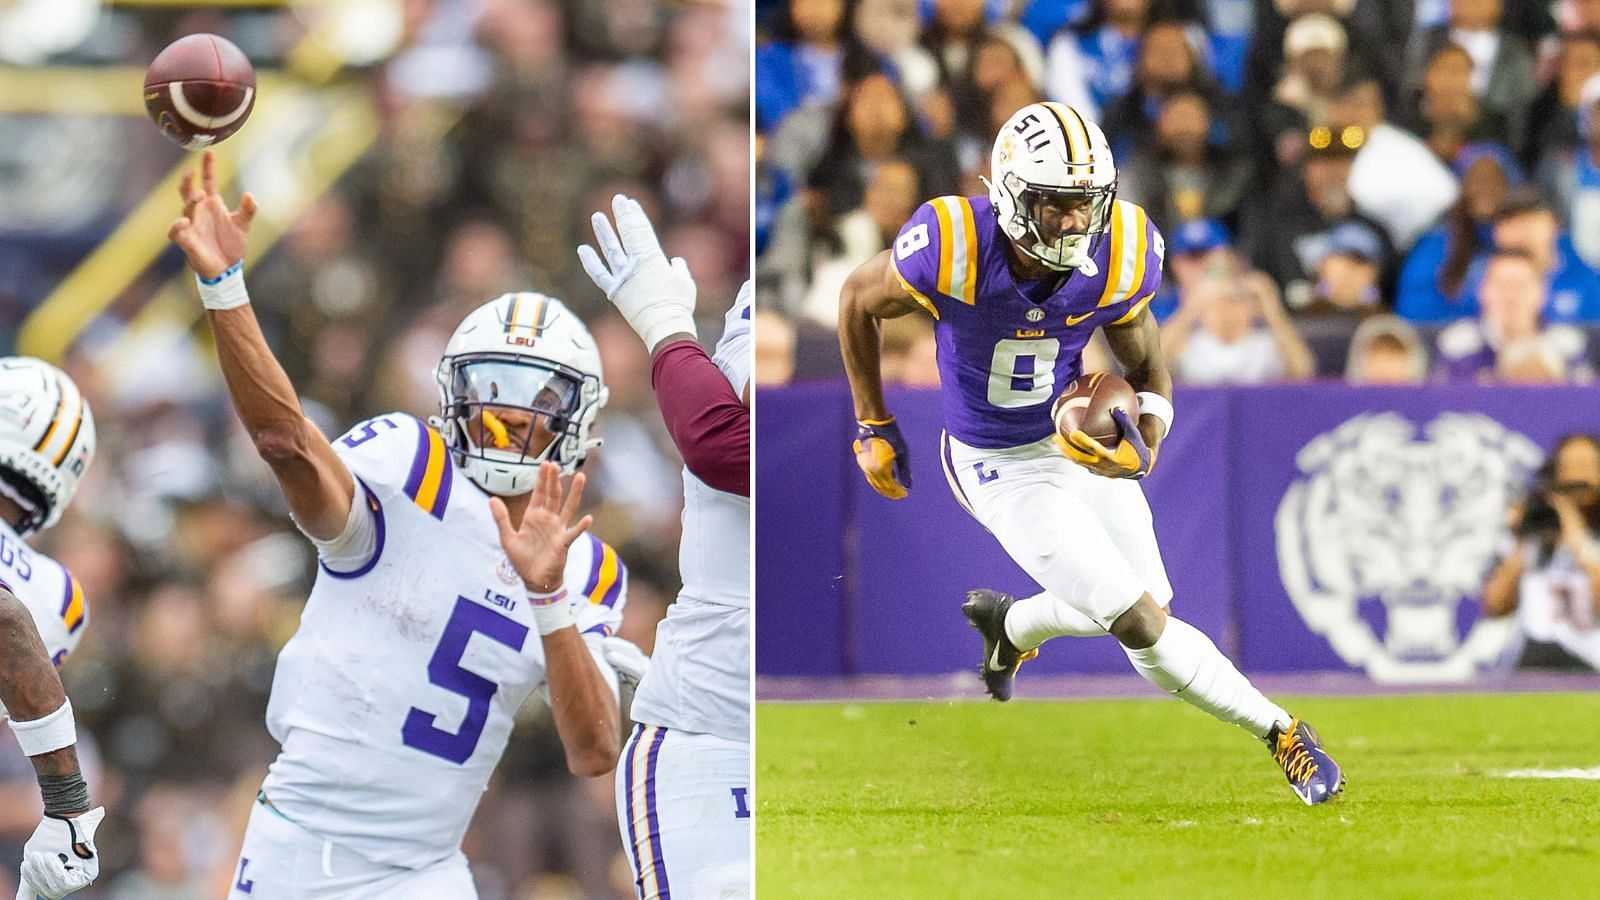 LSU QB Jayden Daniels and WR Malik Nabers are two of the top prospects in the 2024 NFL Draft.